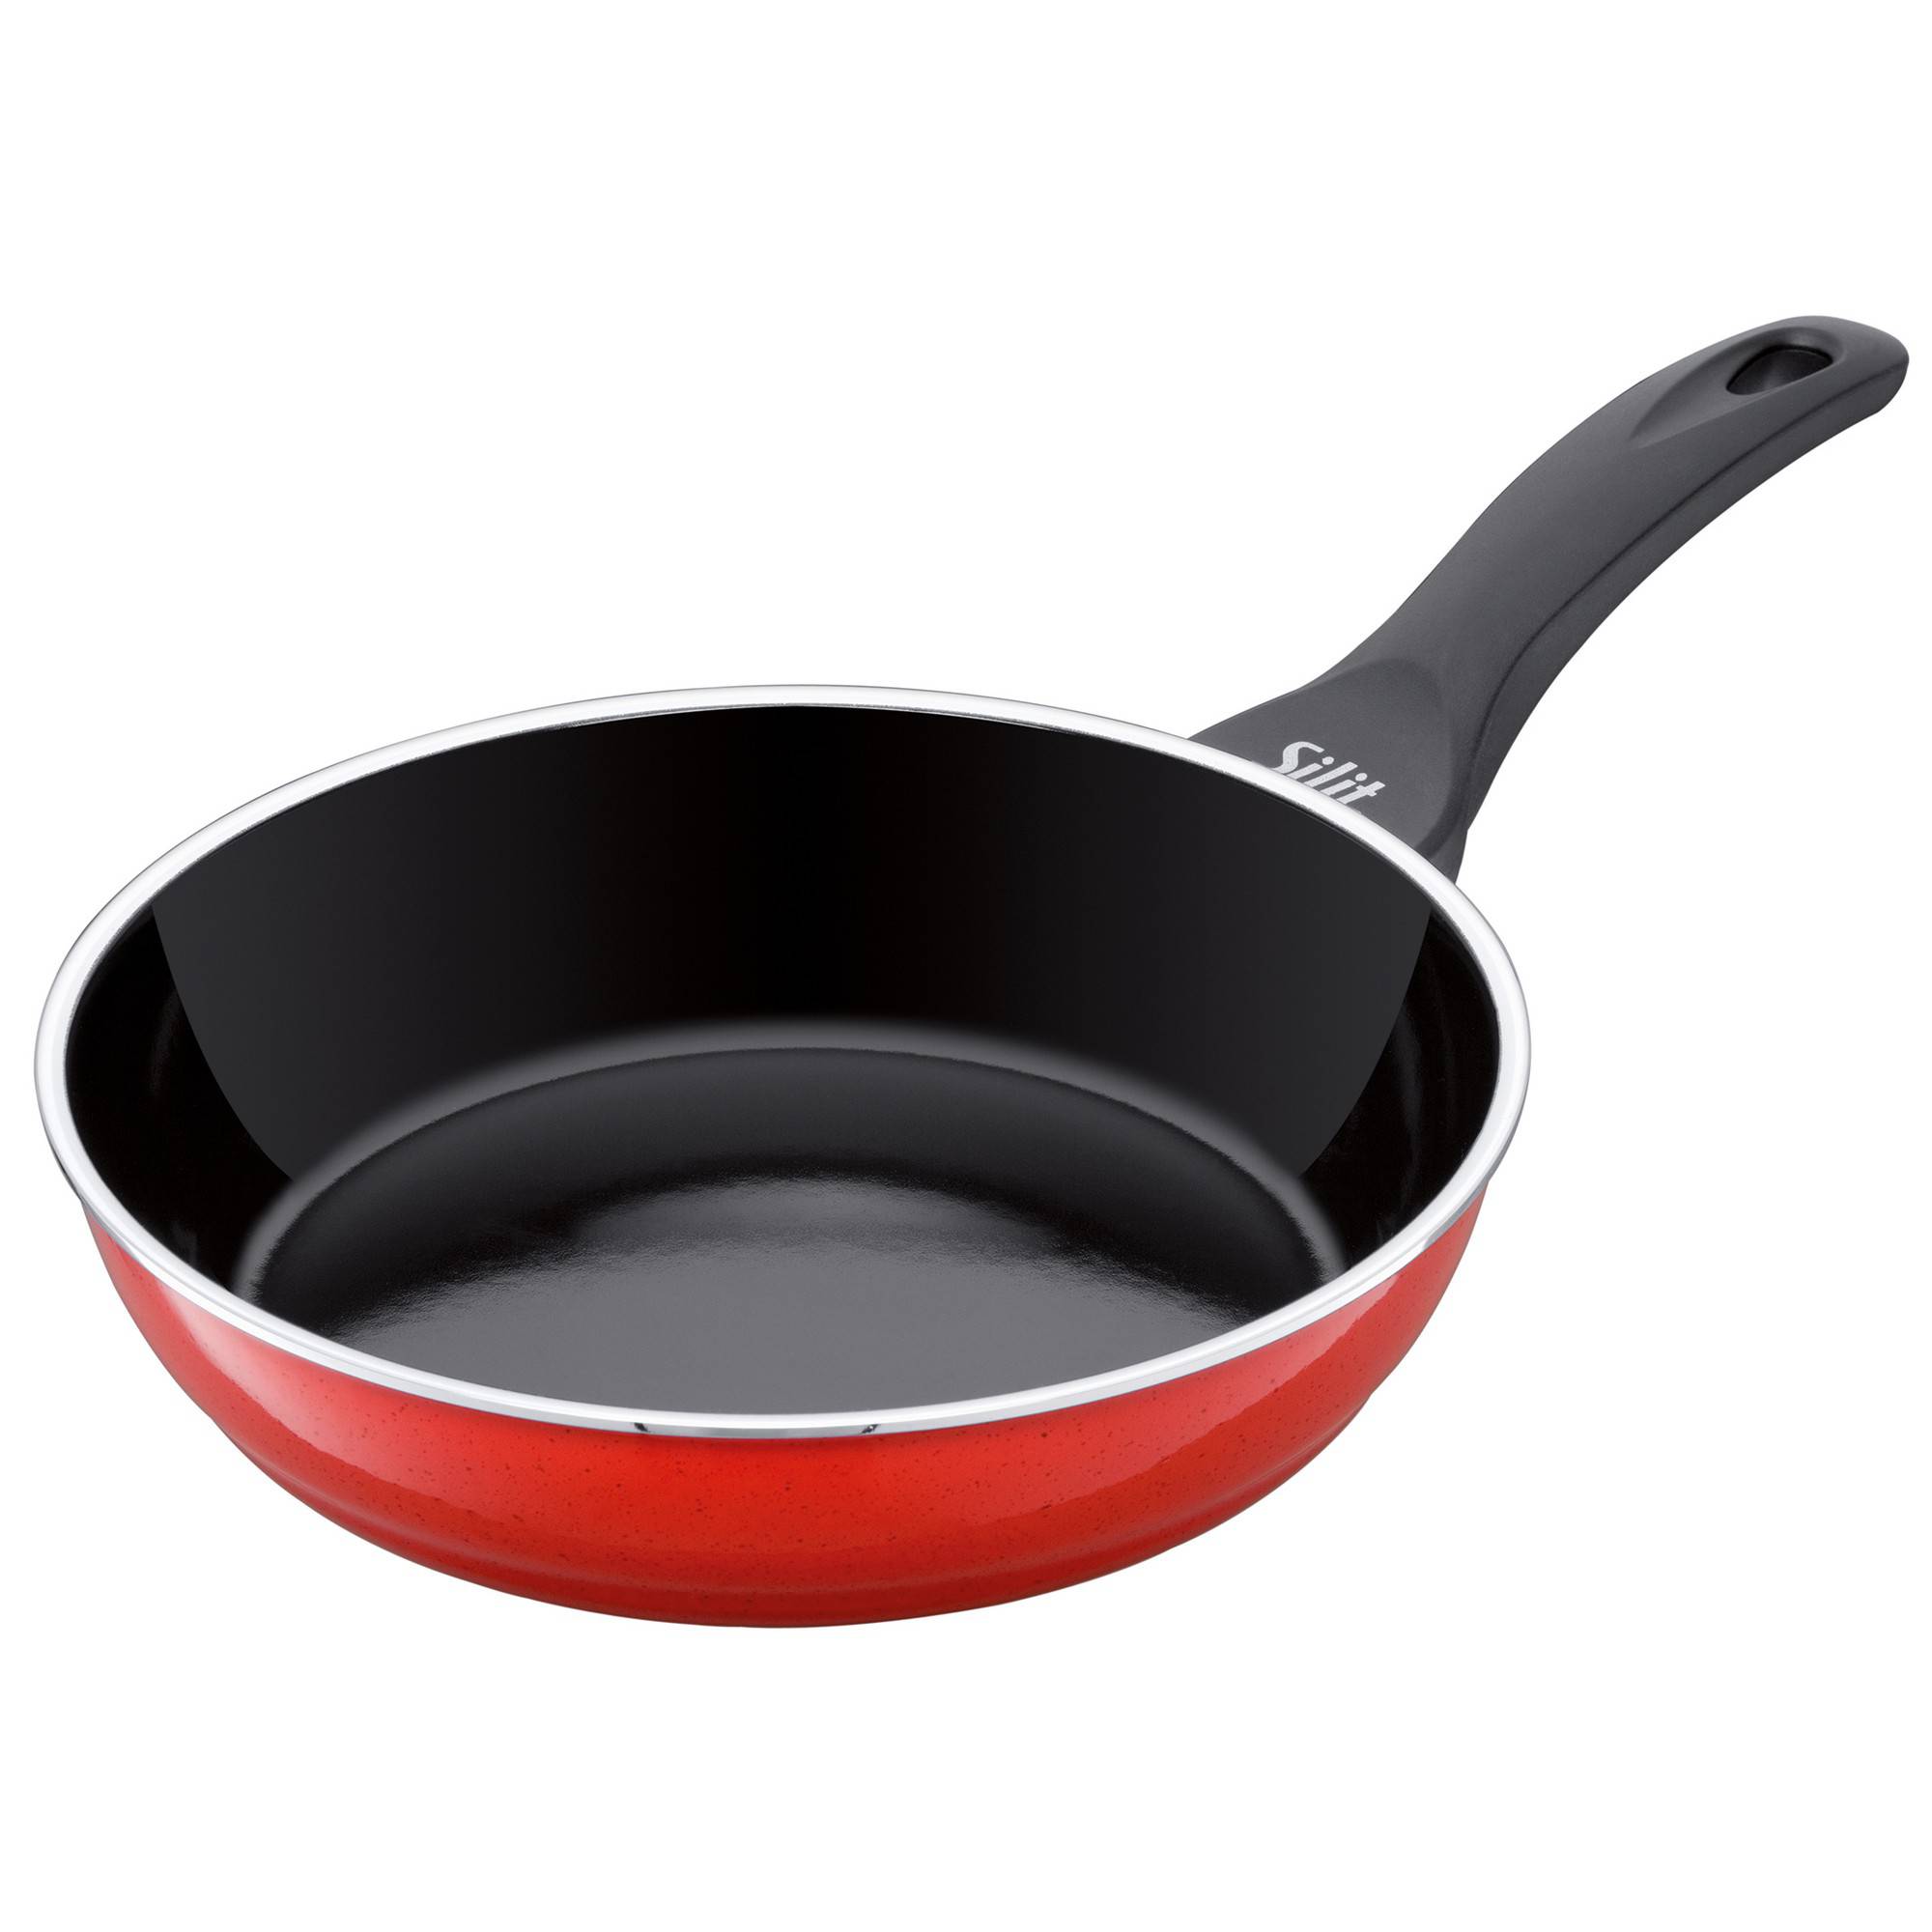 Fry and stew like a professional with WMF pans